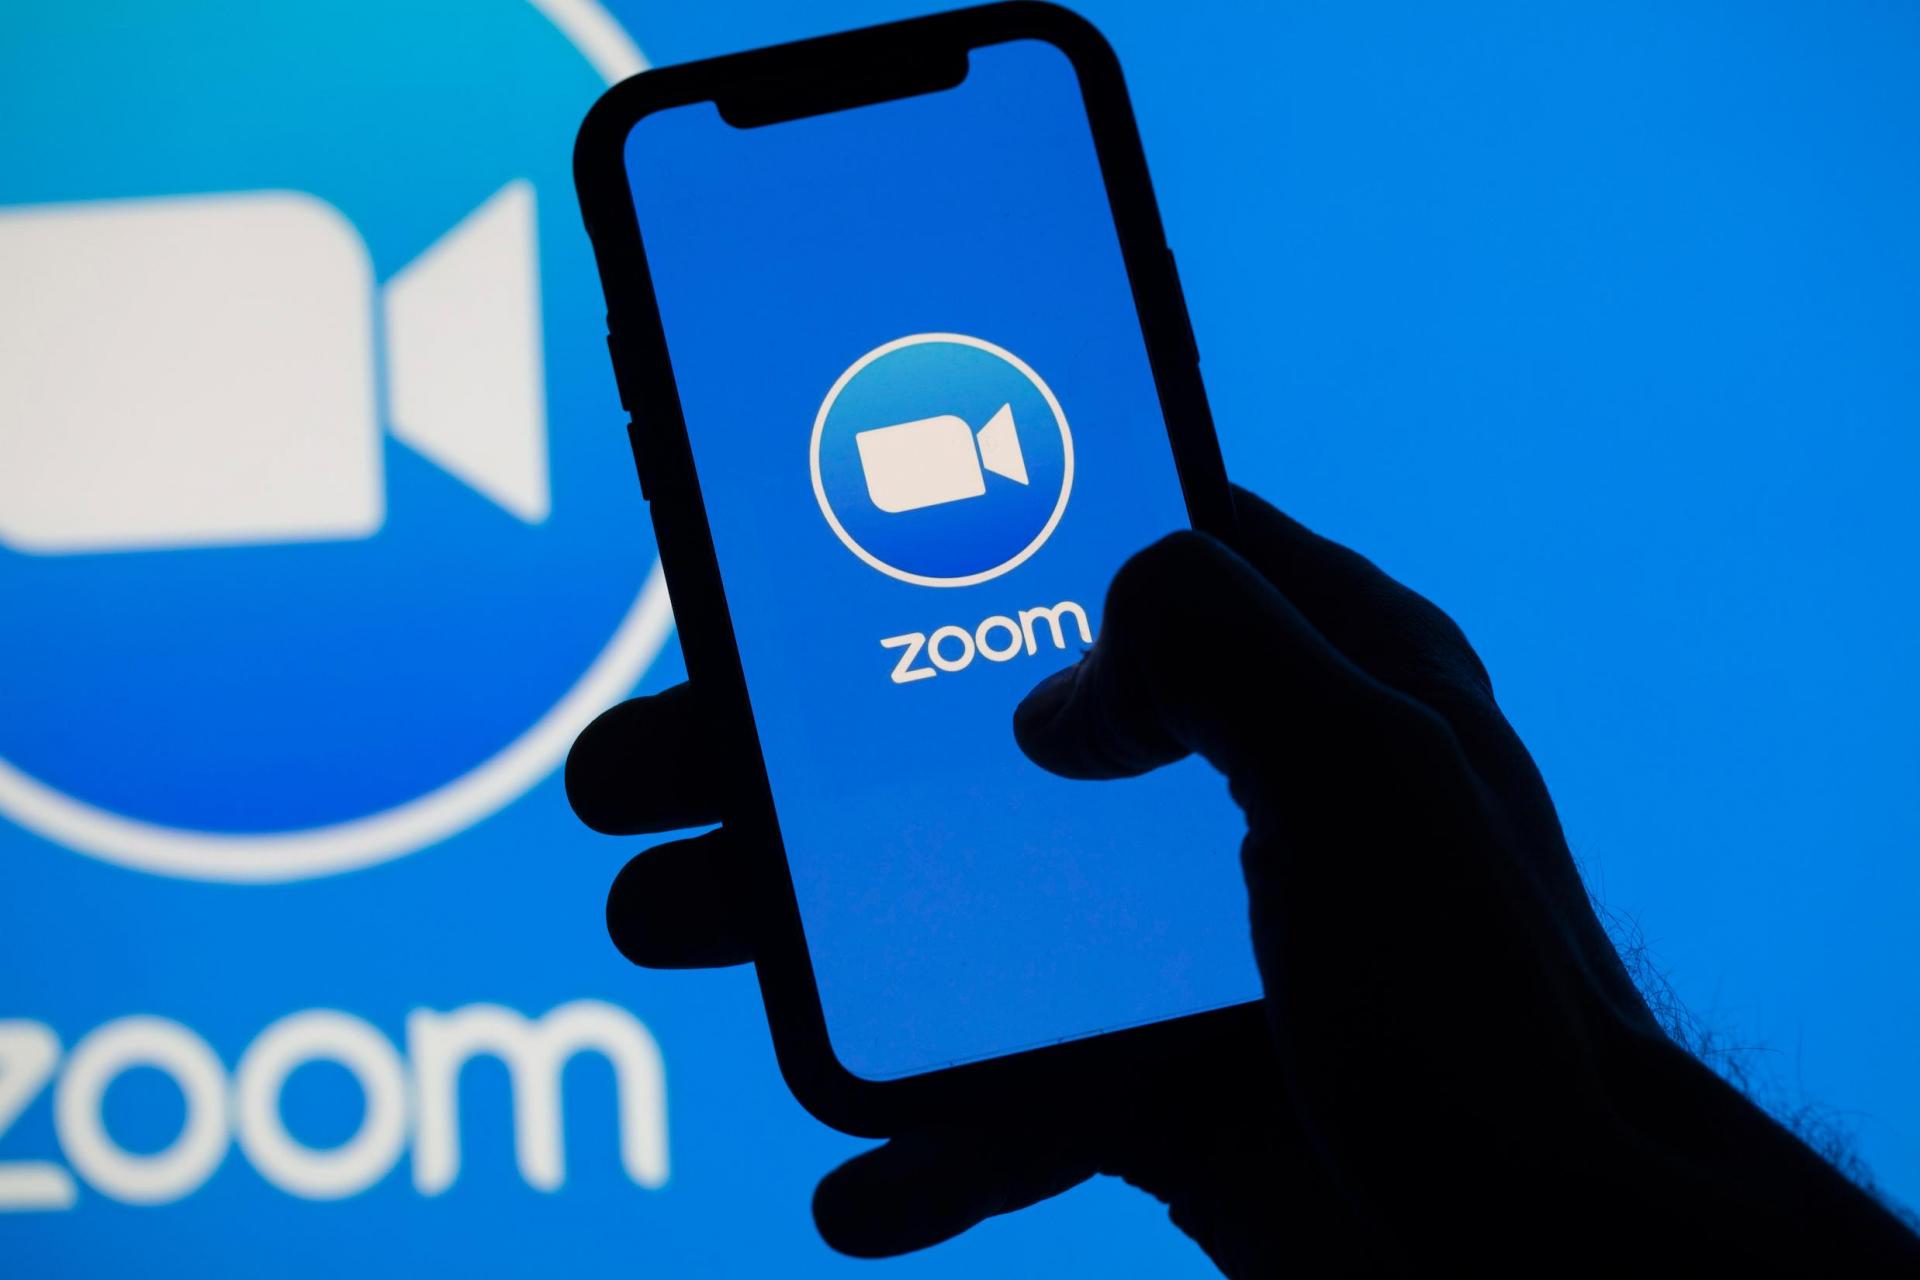 Video Conferencing with Zoom